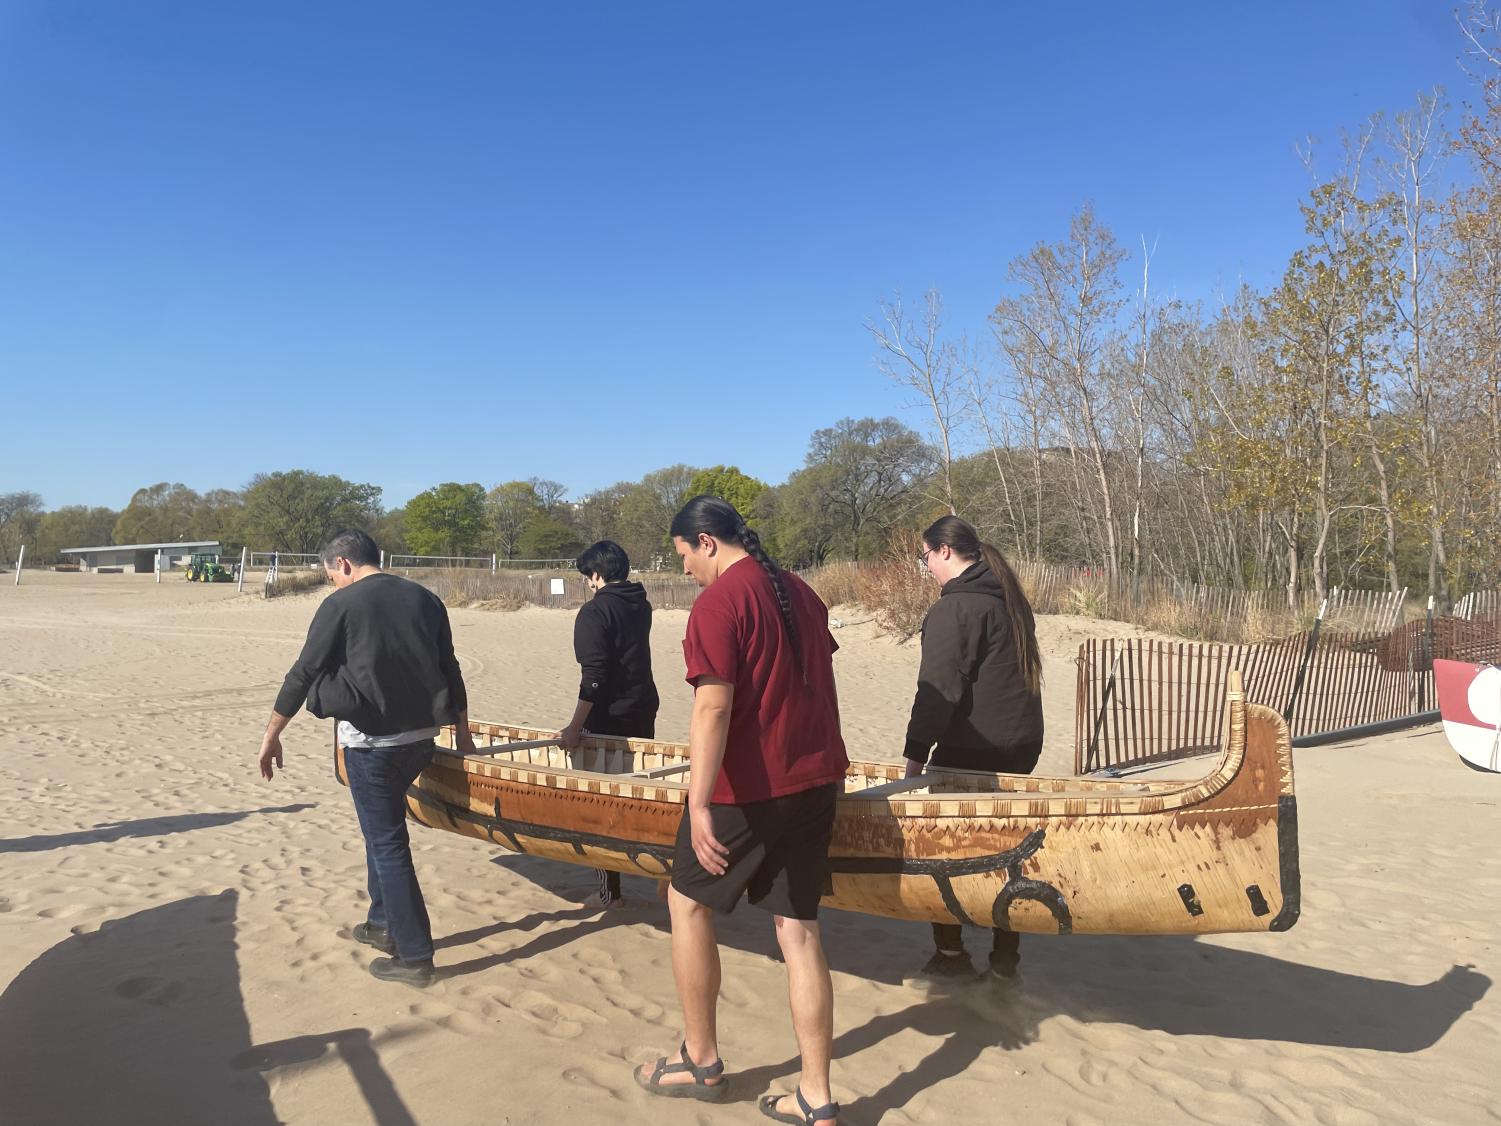 Four+people+are+carrying+a+birch+canoe+on+the+beach.